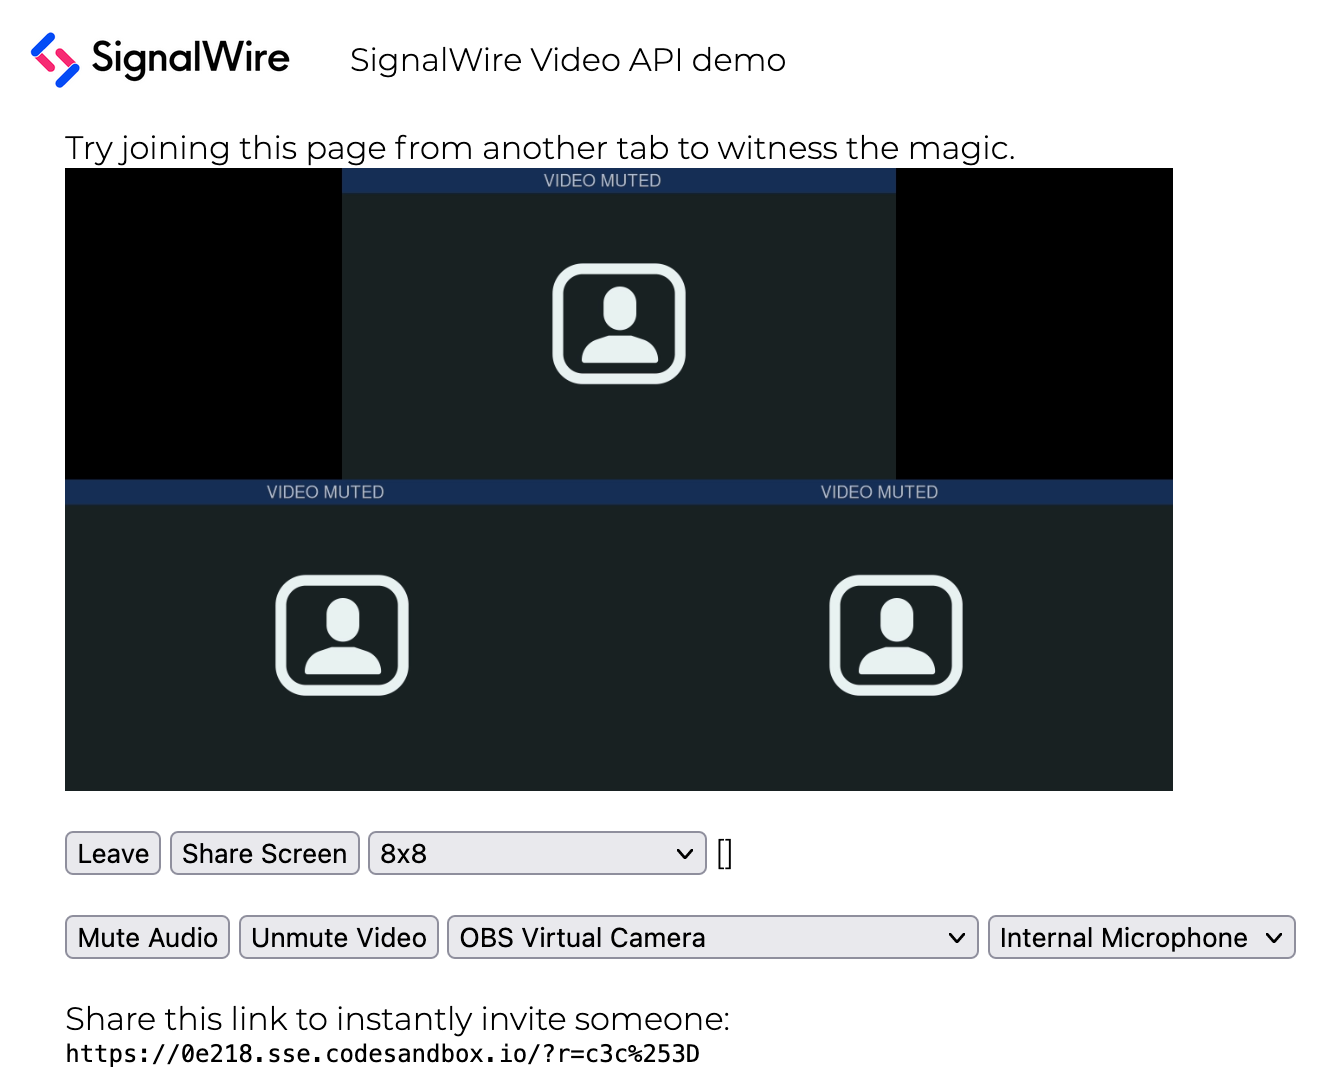 This screenshot shows a SignalWire video call with three participants. The buttons beneath the video allow the user to do the following actions: Leave the call, Share Screen, change video grid, Mute or Unmute Audio and Video, and change the camera and microphone.